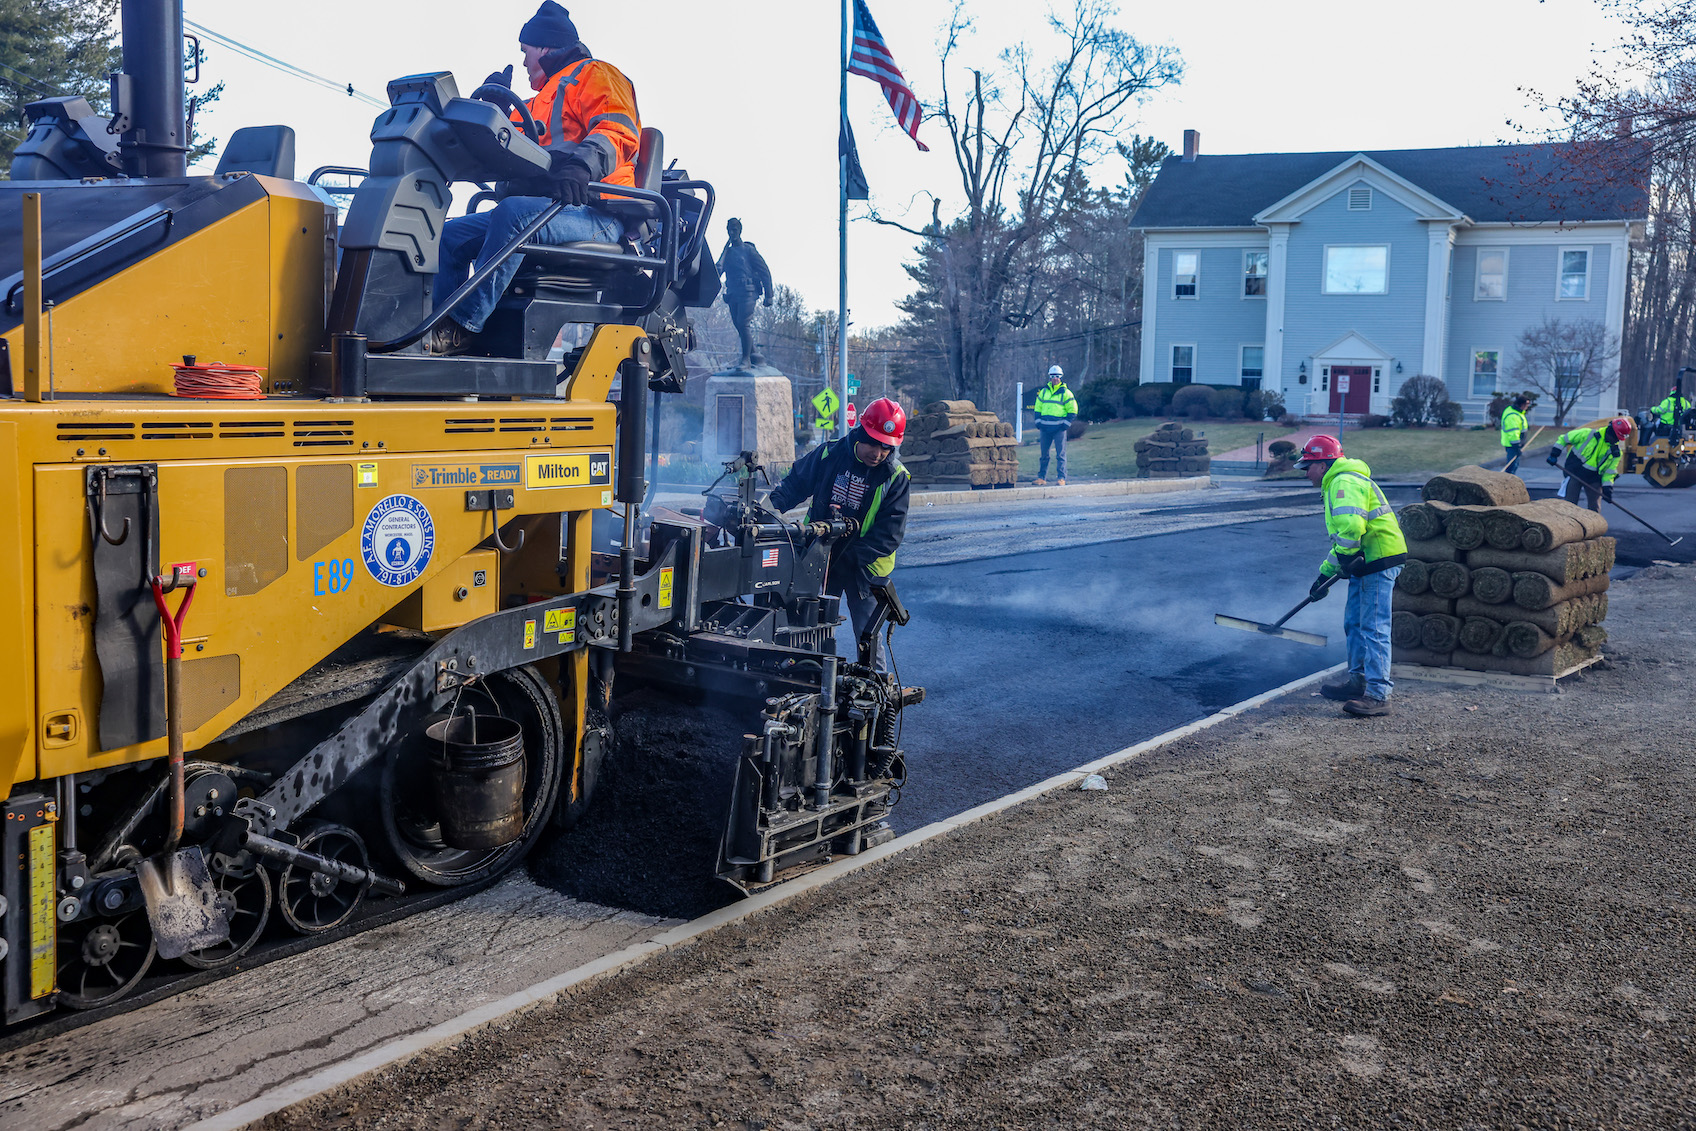 DPW announces streets that will be paved this summer; detours on West Main Street, Wilson Street for roadwork this week